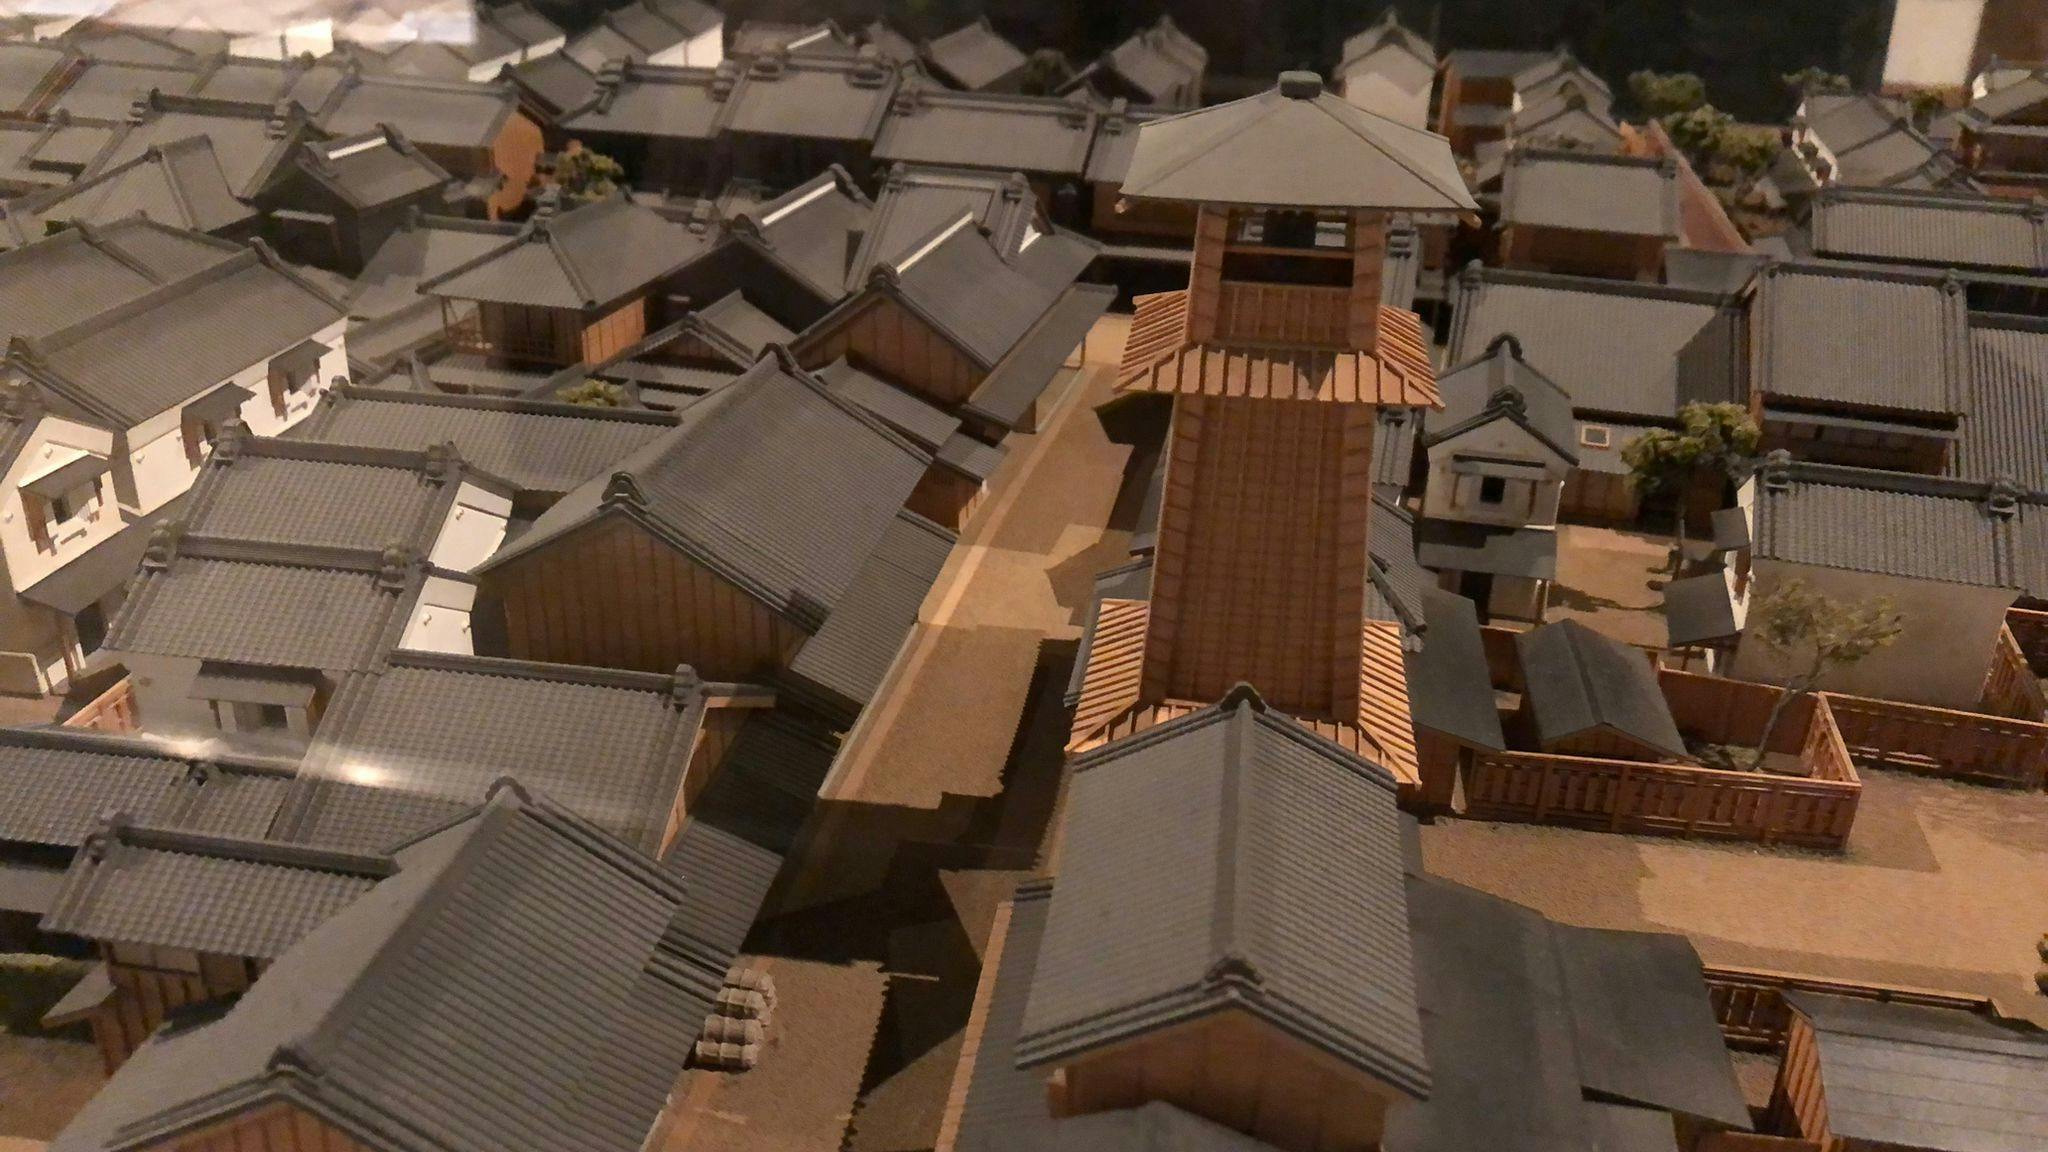 The models of the houses of the Edo era